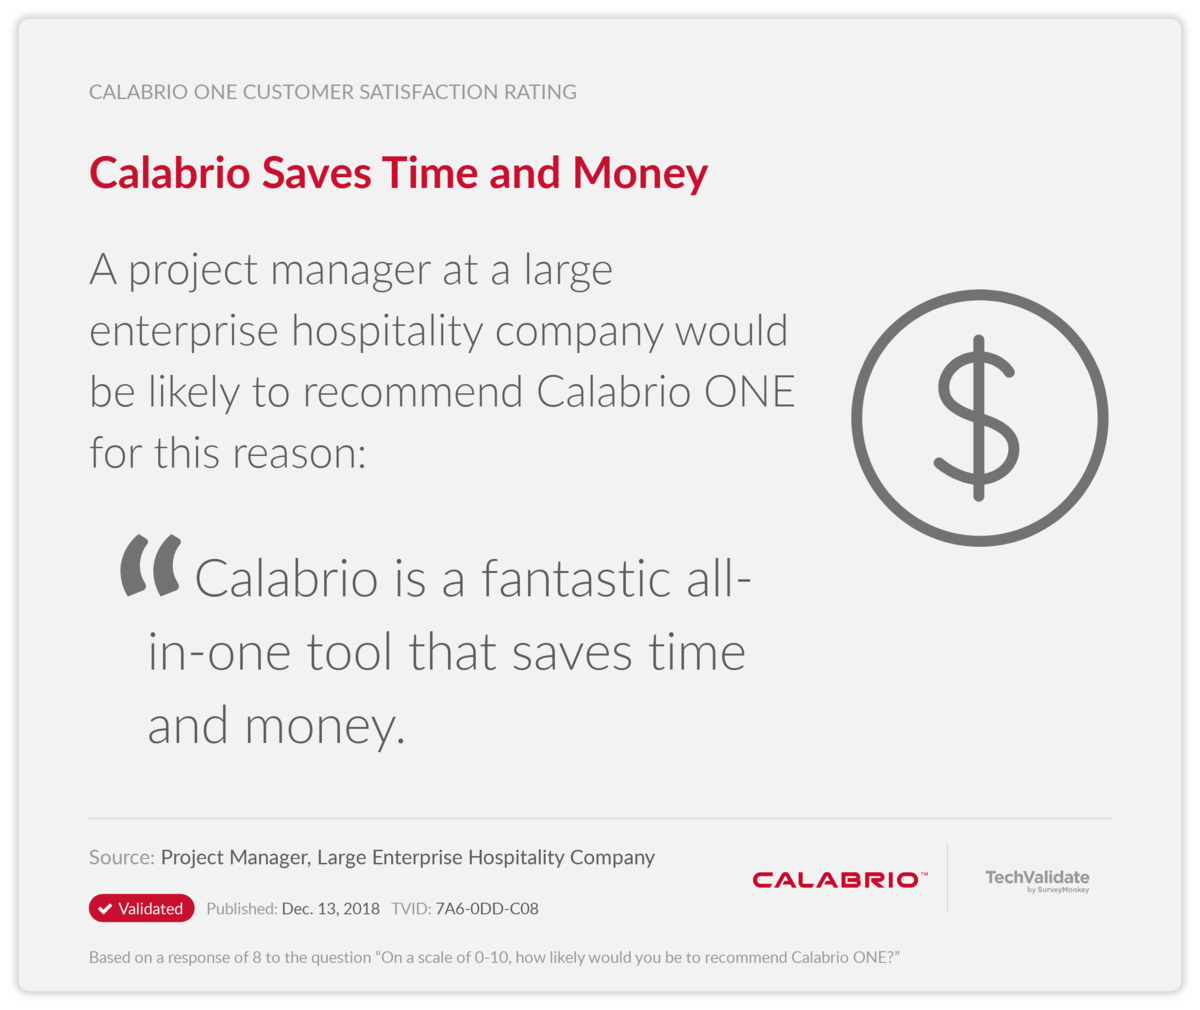 Calabrio Saves Time and Money